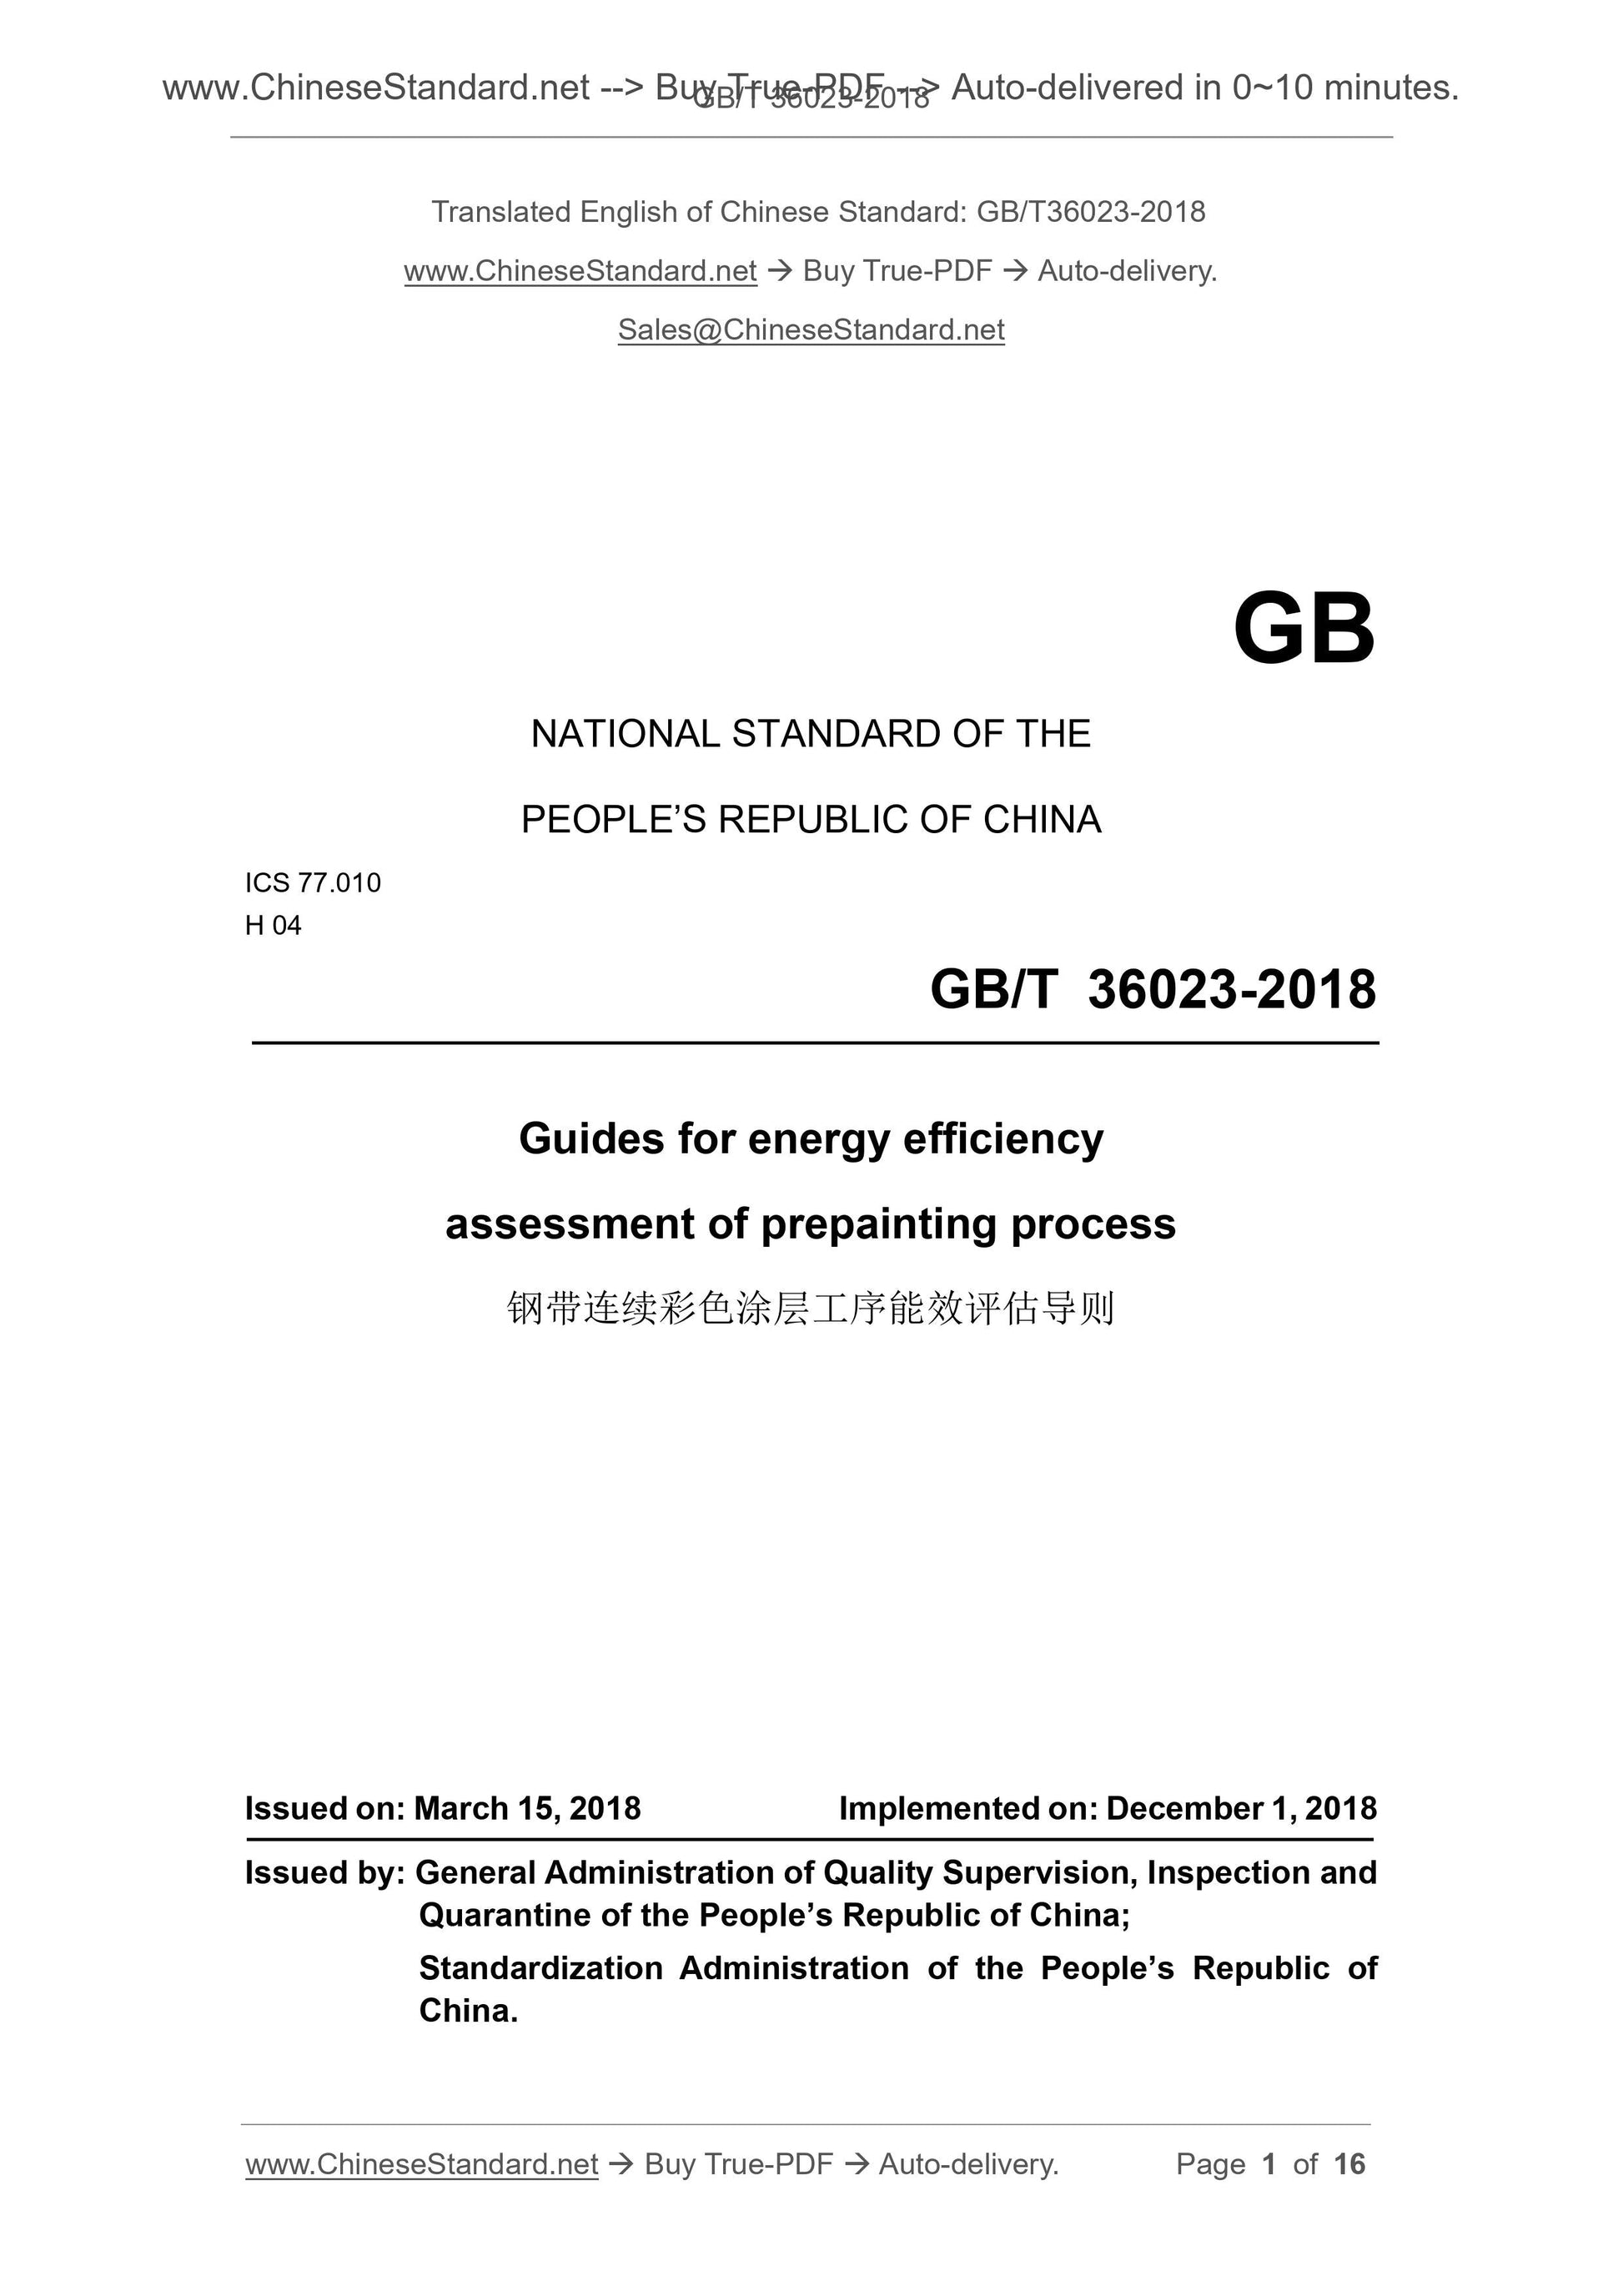 GB/T 36023-2018 Page 1